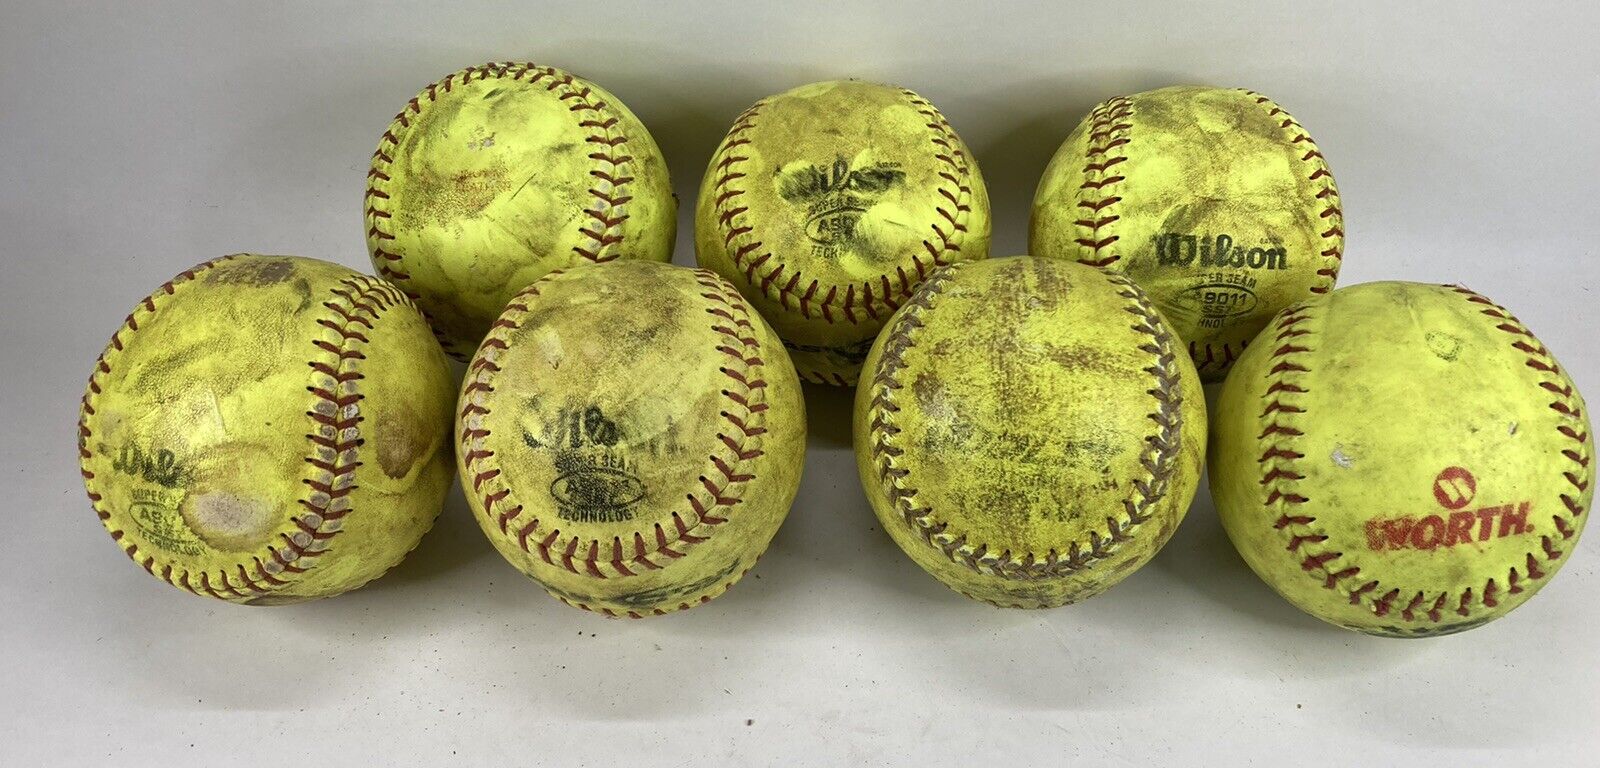 Lot 7 Fastpitch 12” Softballs Used Training Practice Worth Wilson A9011sst Nfca